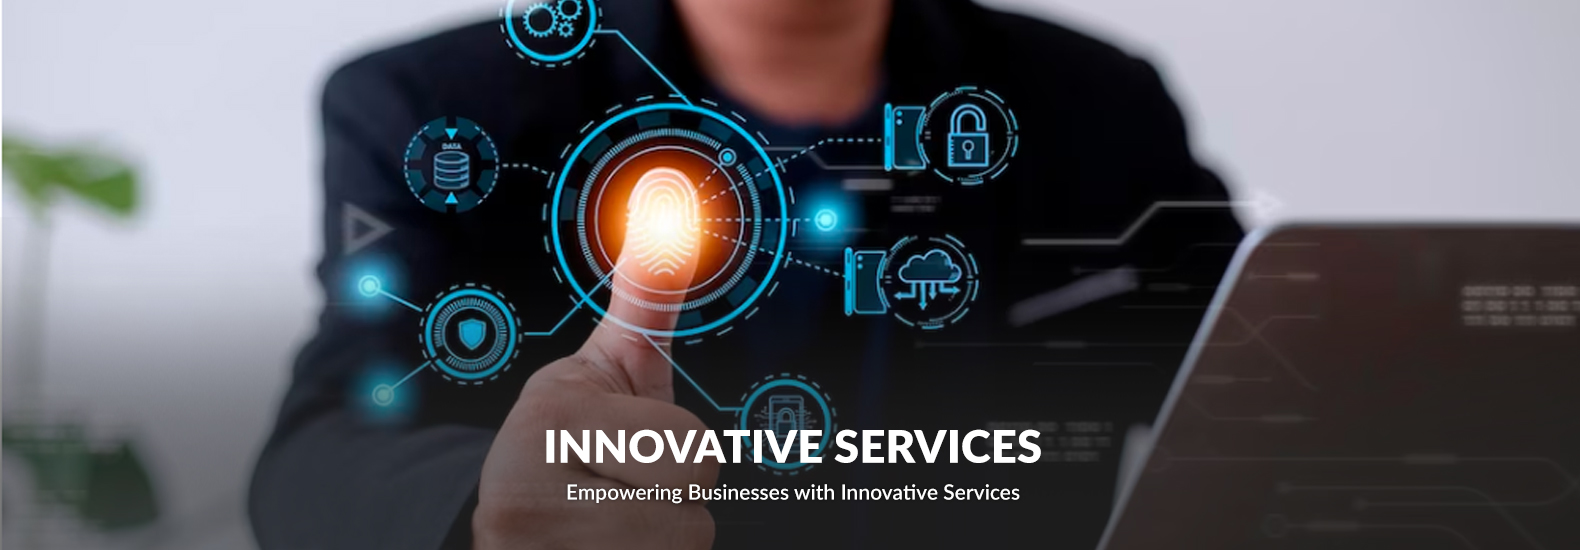 empowering businesses with innovative services